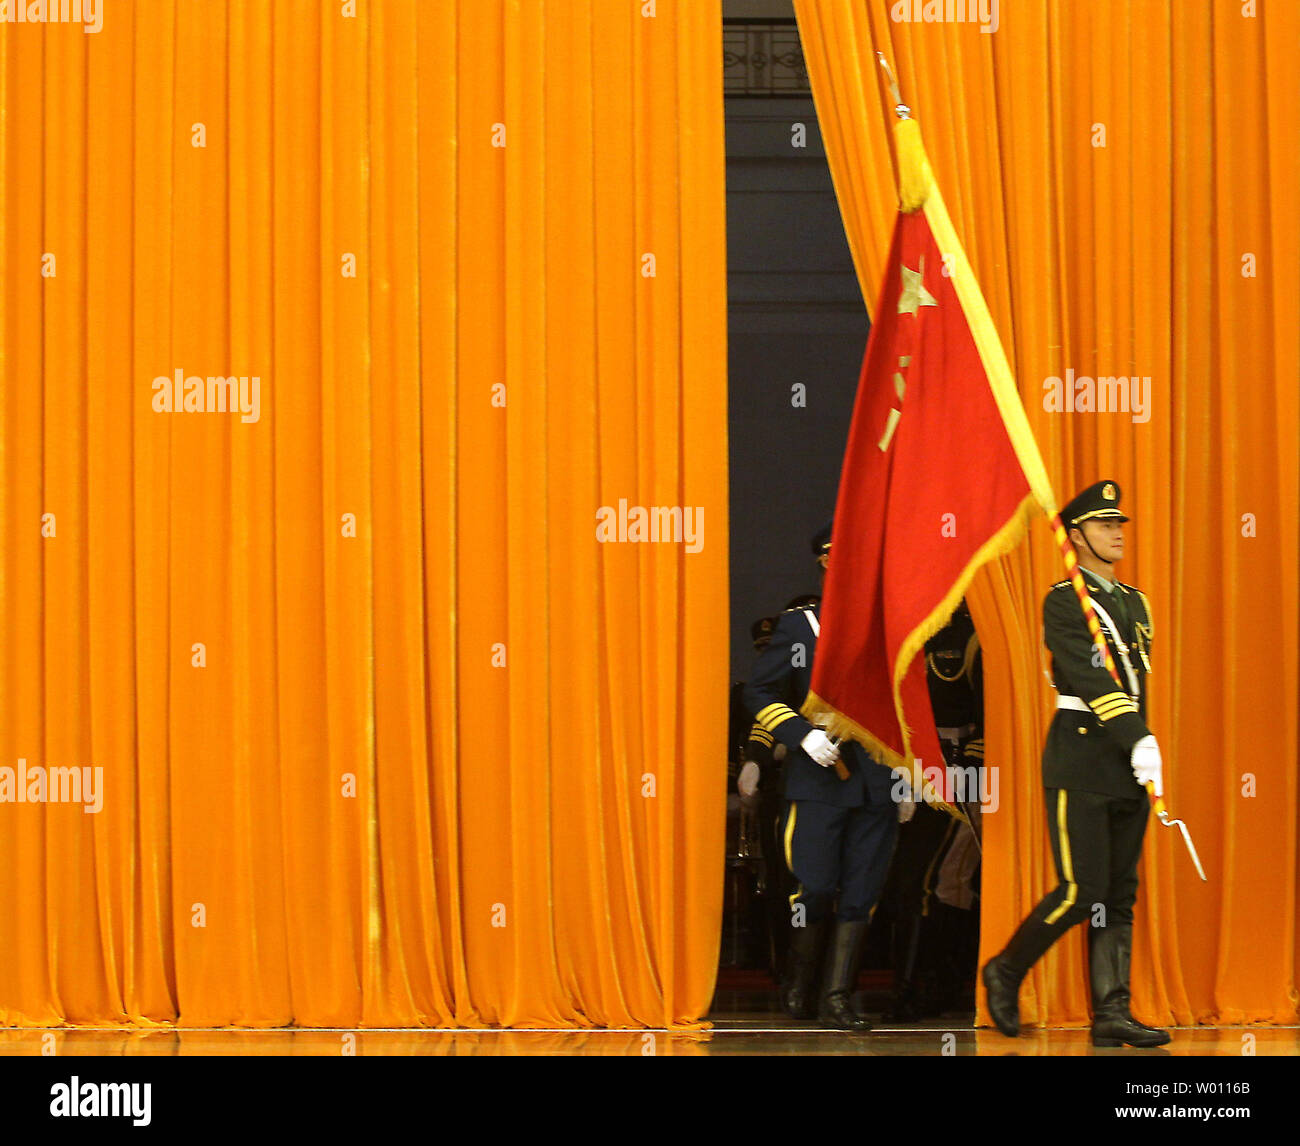 Chinese soldiers performing honor guard duties emerge from behind a large curtain in Beijing on June 7, 2012.      UPI/Stephen Shaver Stock Photo